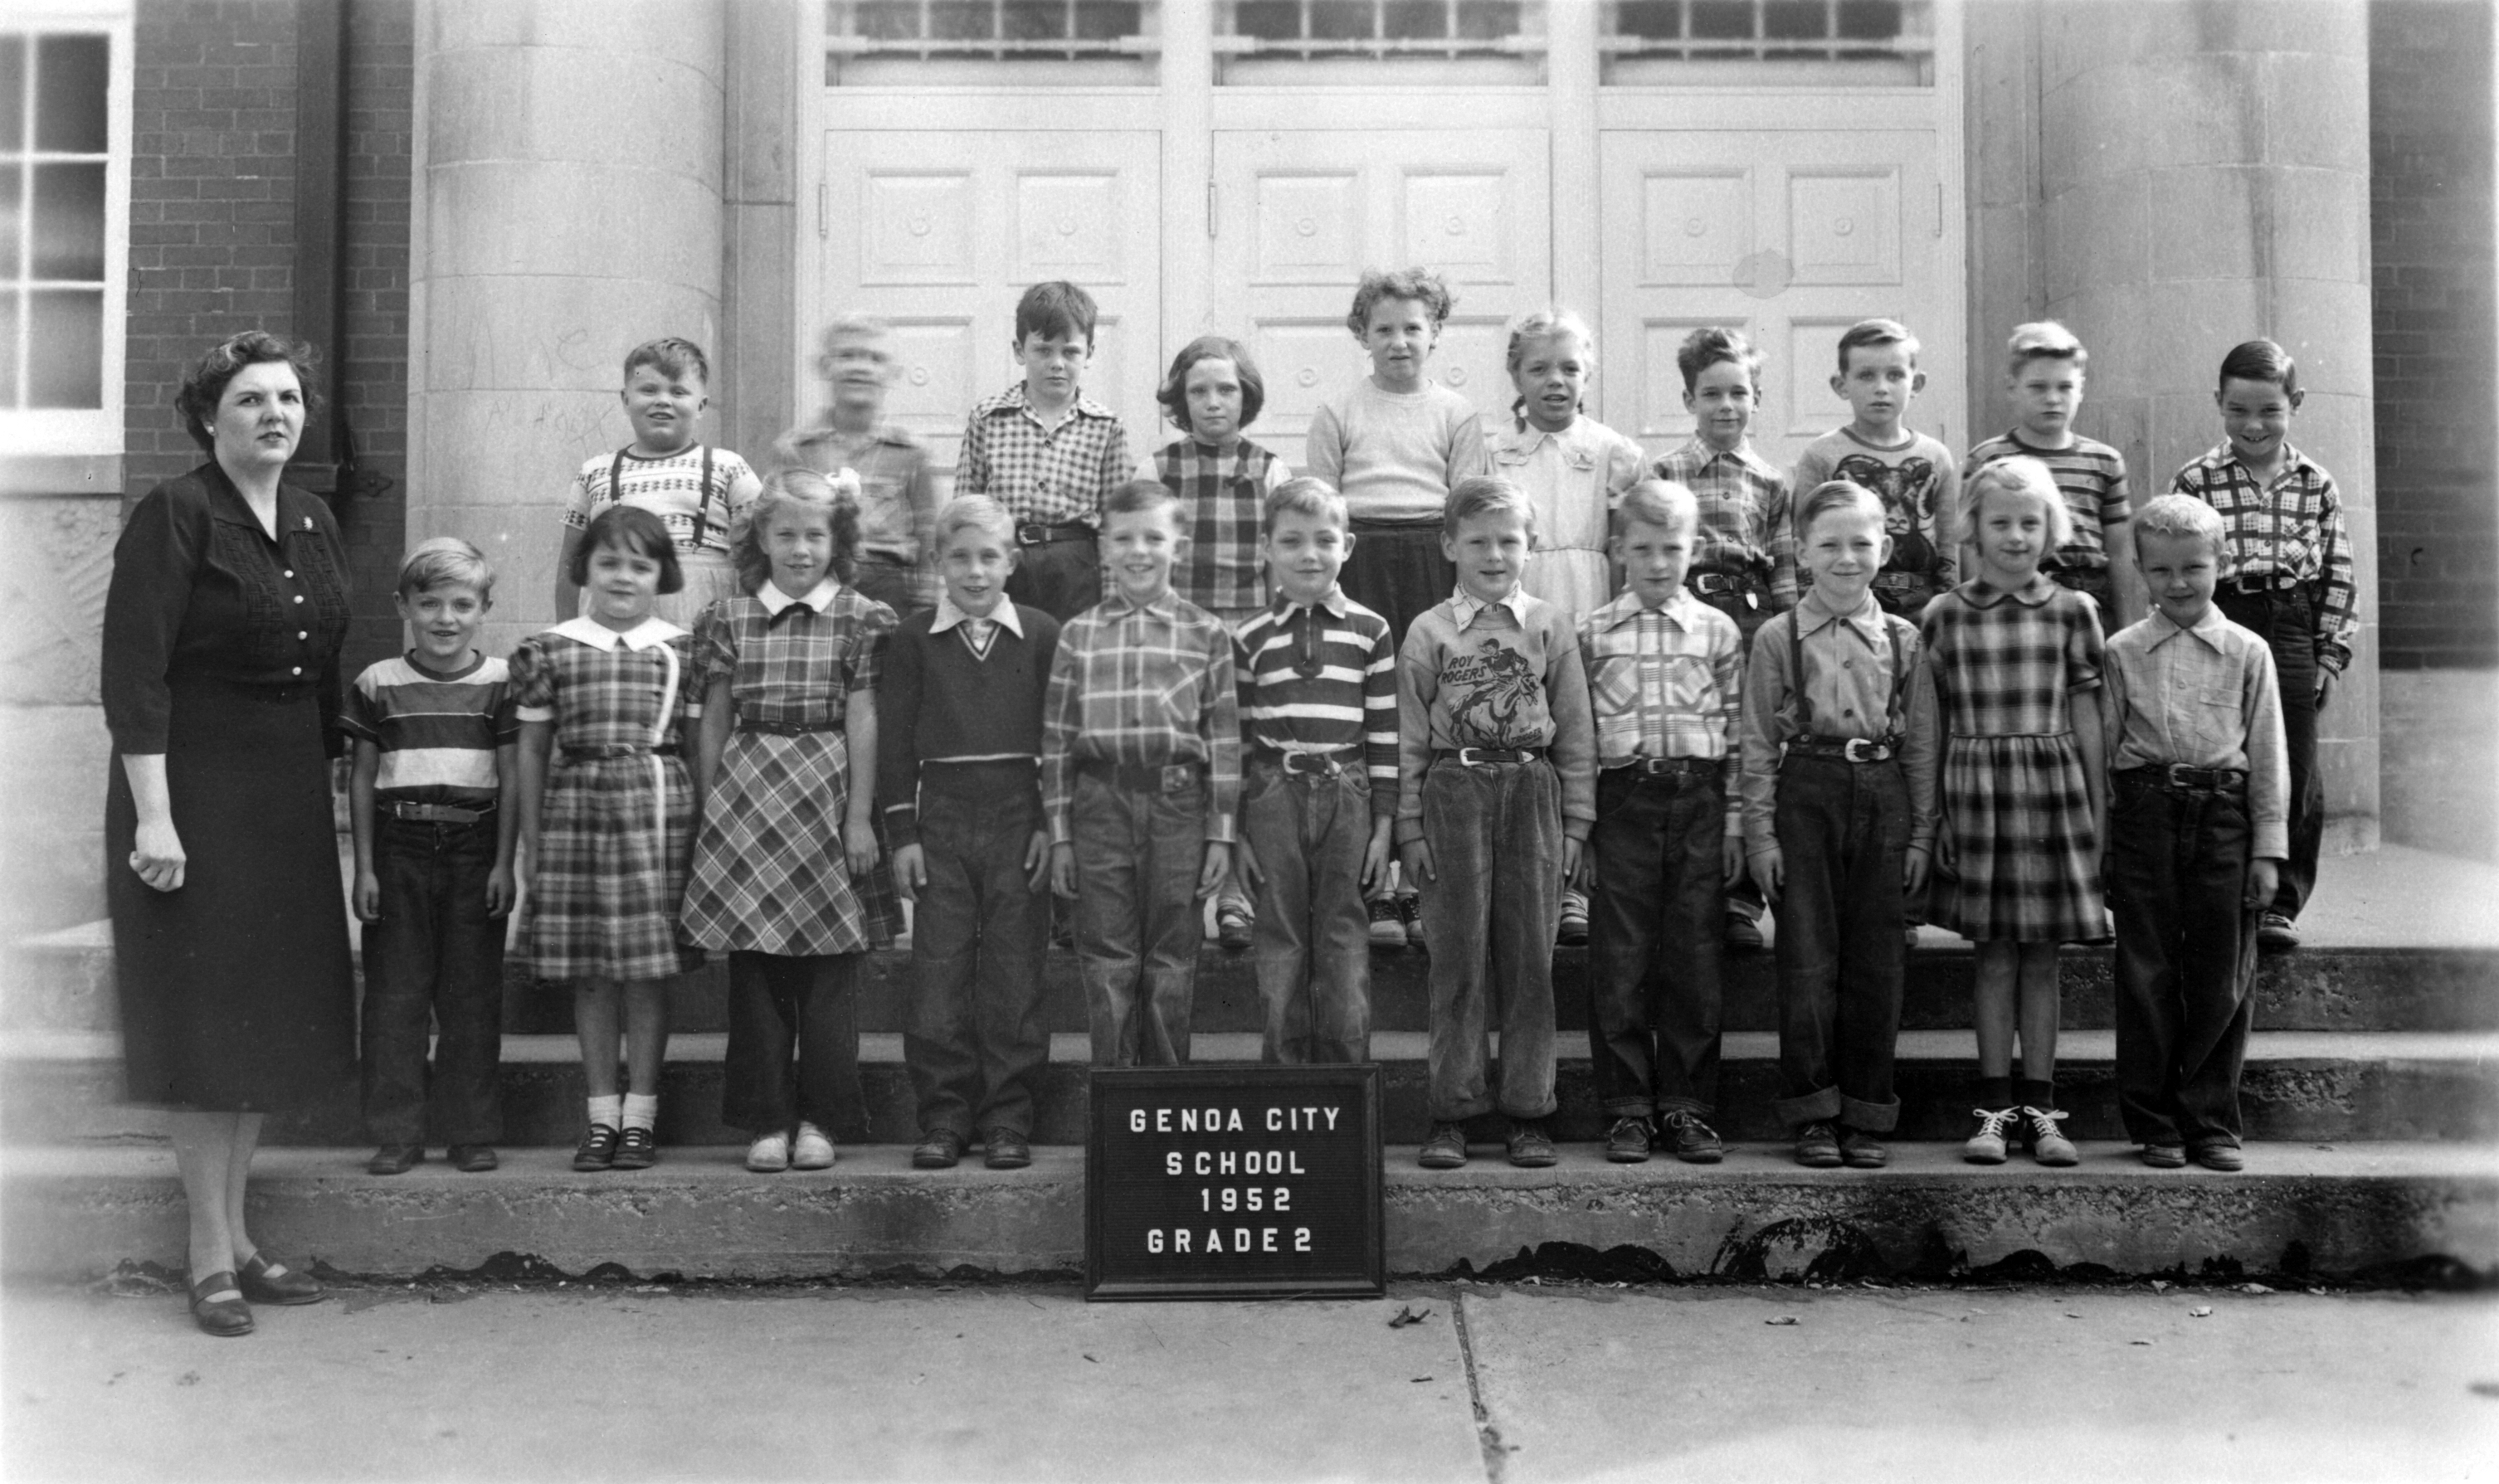 Class photo of the second grade on the front steps of the Genoa City school in 1952.